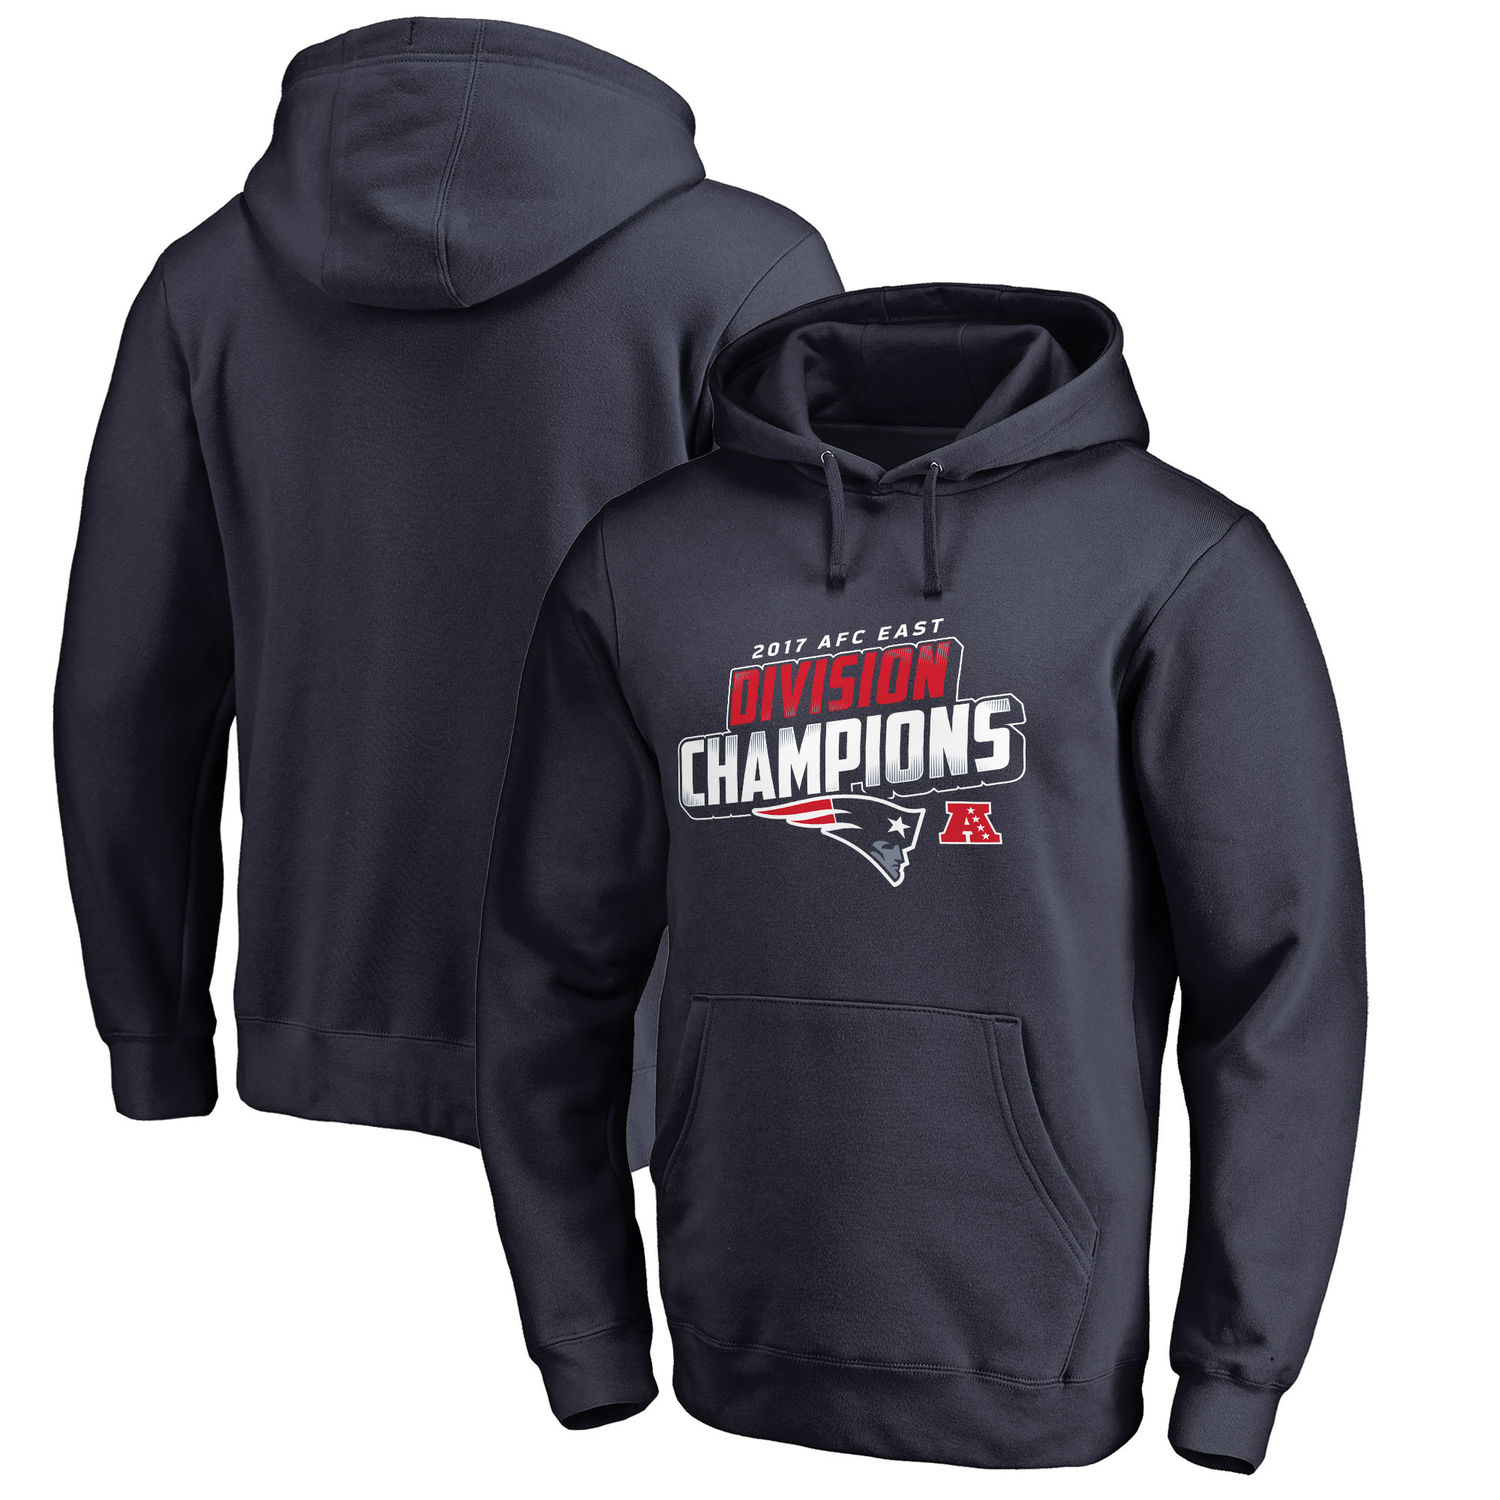 Men's New England Patriots NFL Pro Line by Fanatics Branded Navy 2017 AFC East Division Champions Pullover Hoodie